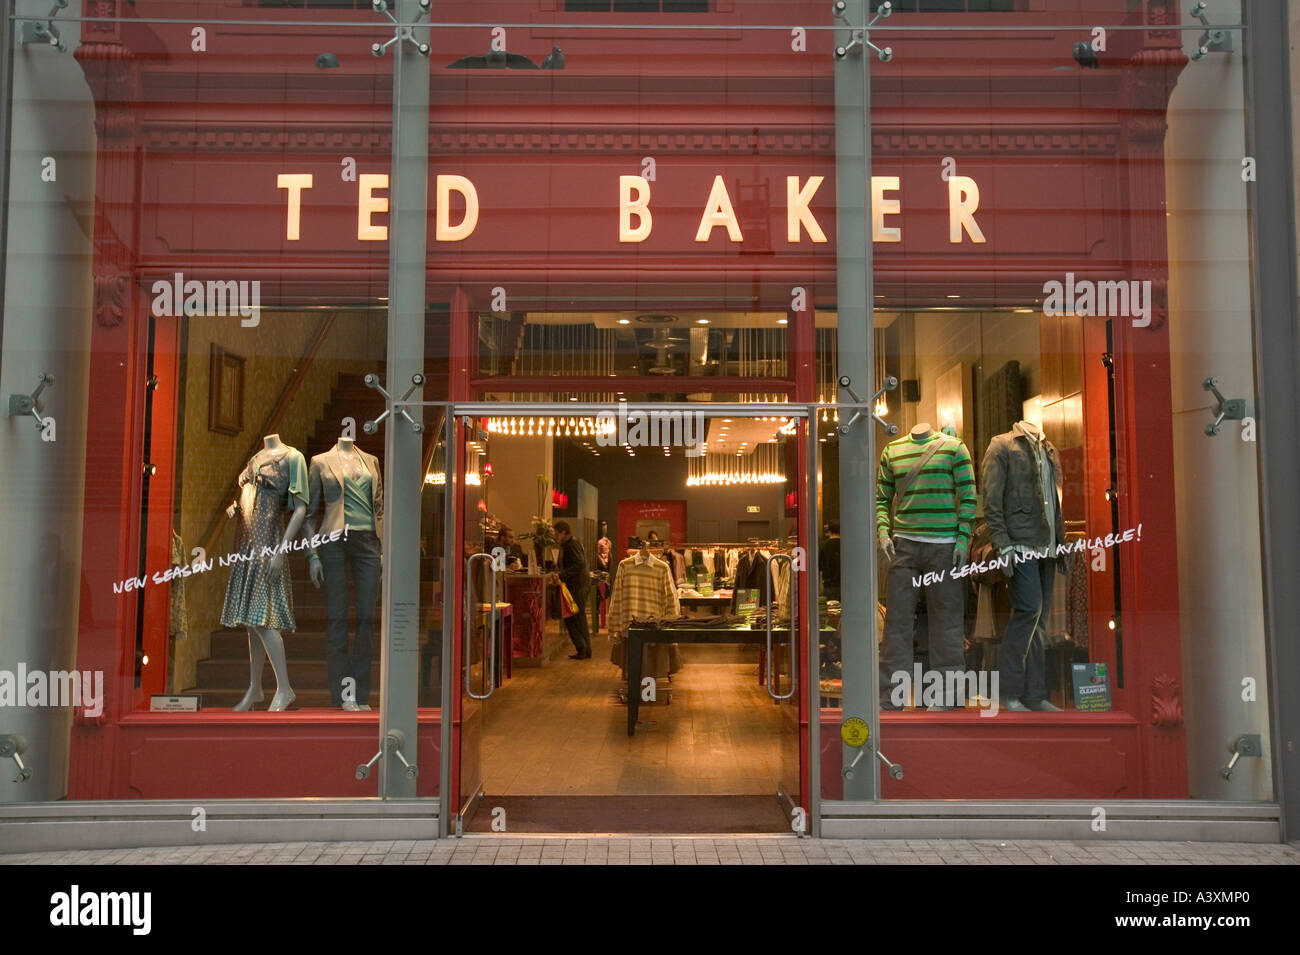 Ted Baker shop in Manchester city centre, UK Stock Photo - Alamy